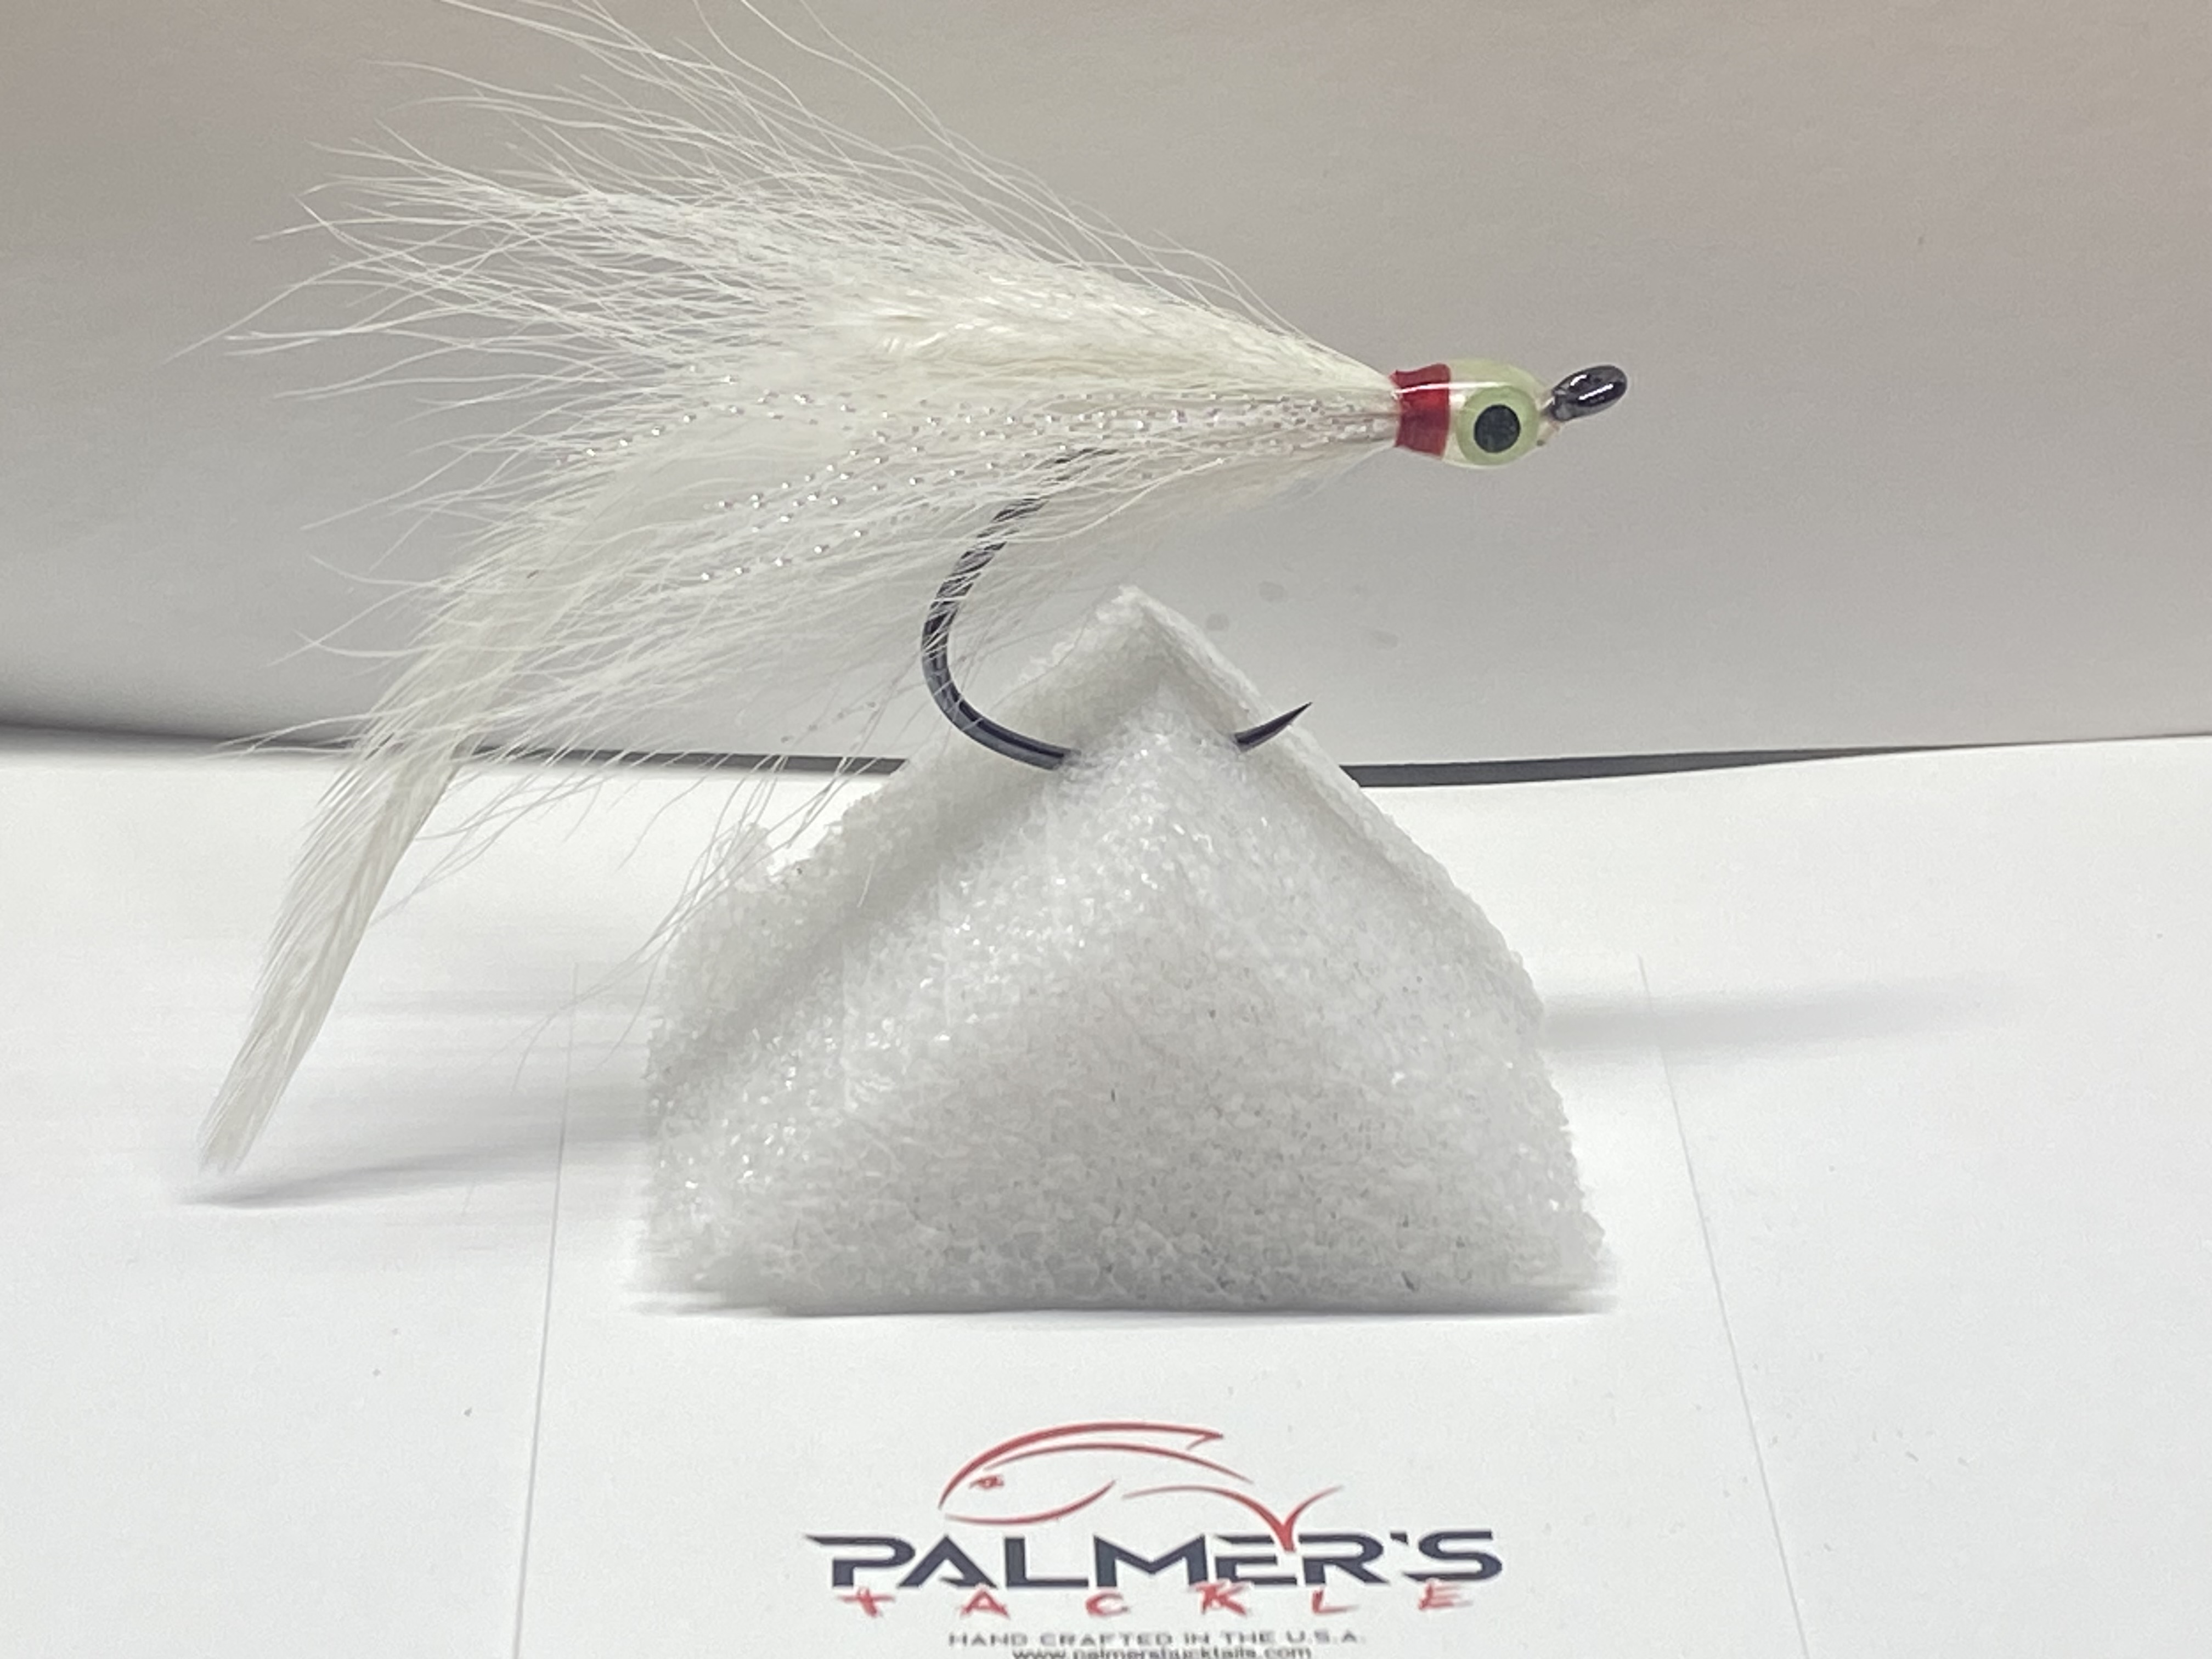 Palmers Bucktails, Palmers Tackle Co., High Quality Saltwater Tackle, Hand  Crafted In USA, Saltwater Lures, Jigs, Bucktails, Round Head Jigs, Gulp Jigs,  Spro Style Jigs, Fluke Jigs, Fluke Rigs, Tog Rigs, Tog